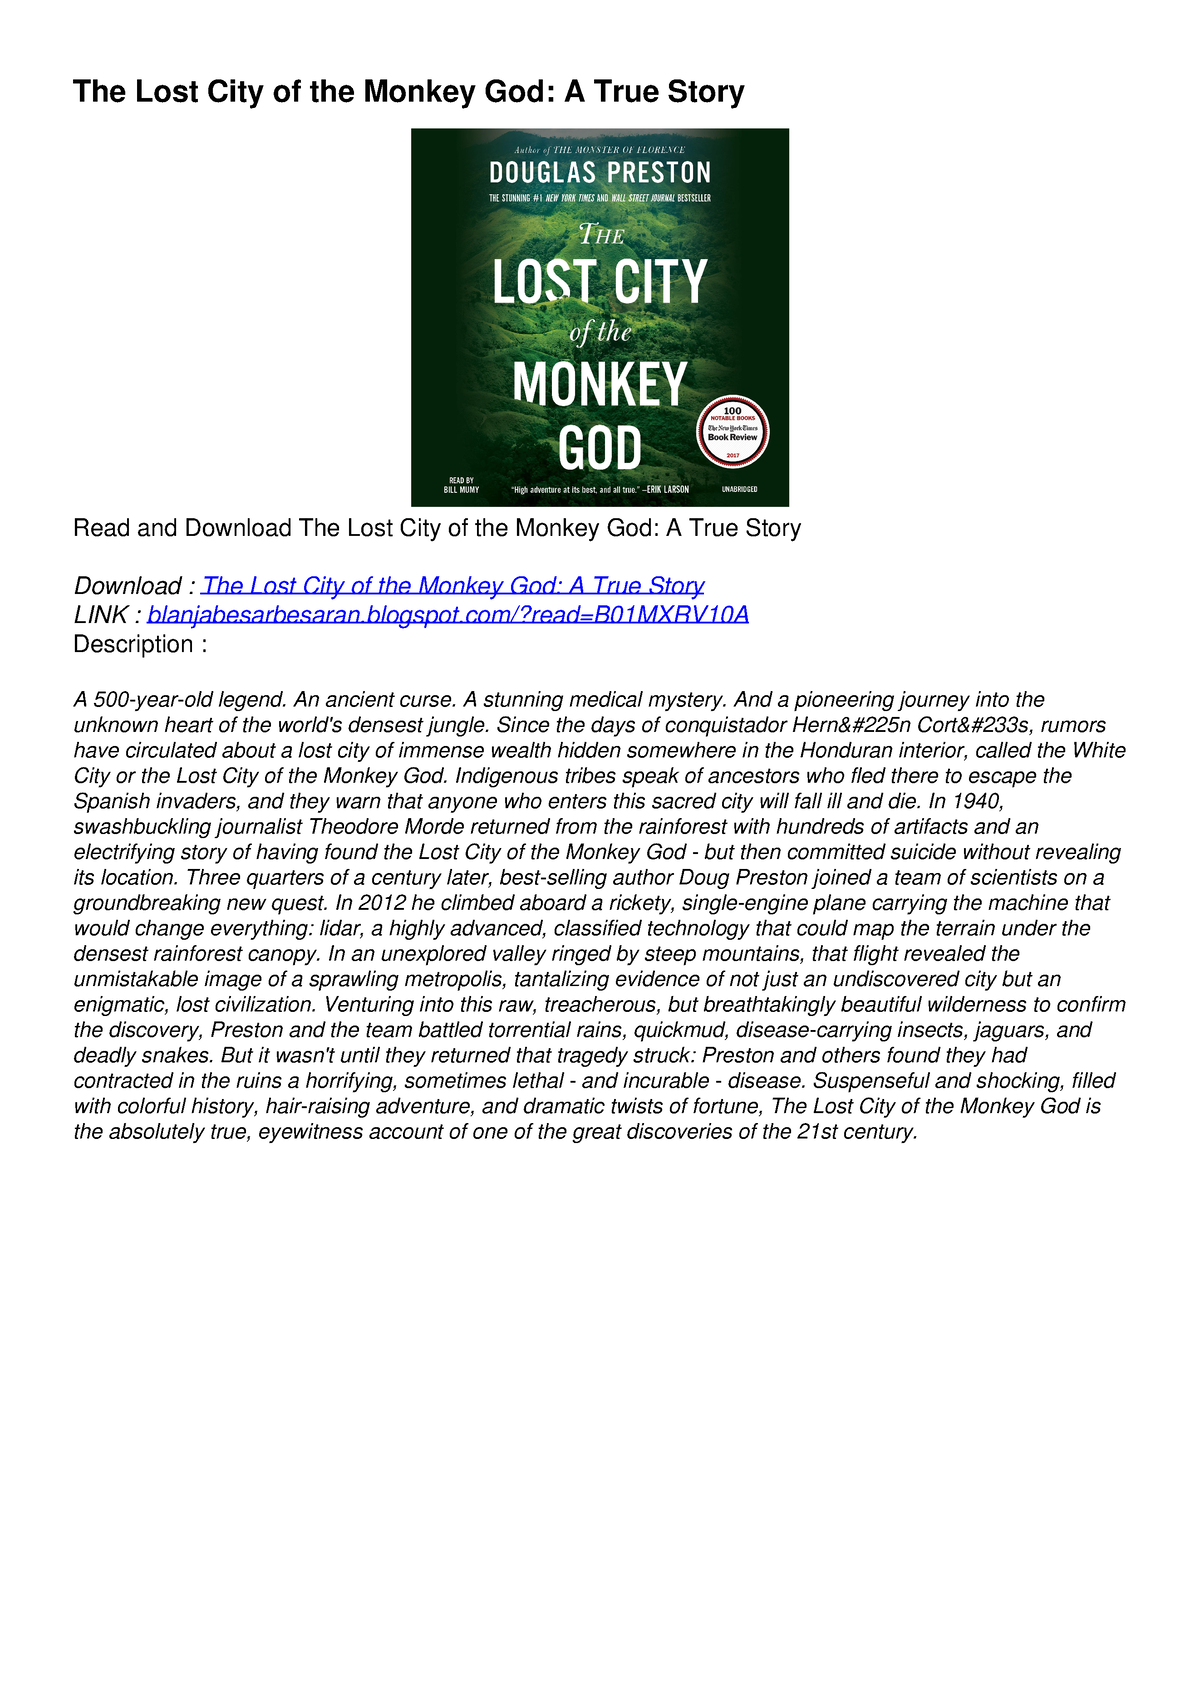 READ [PDF] The Lost City of the Monkey God: A True Story full - The ...